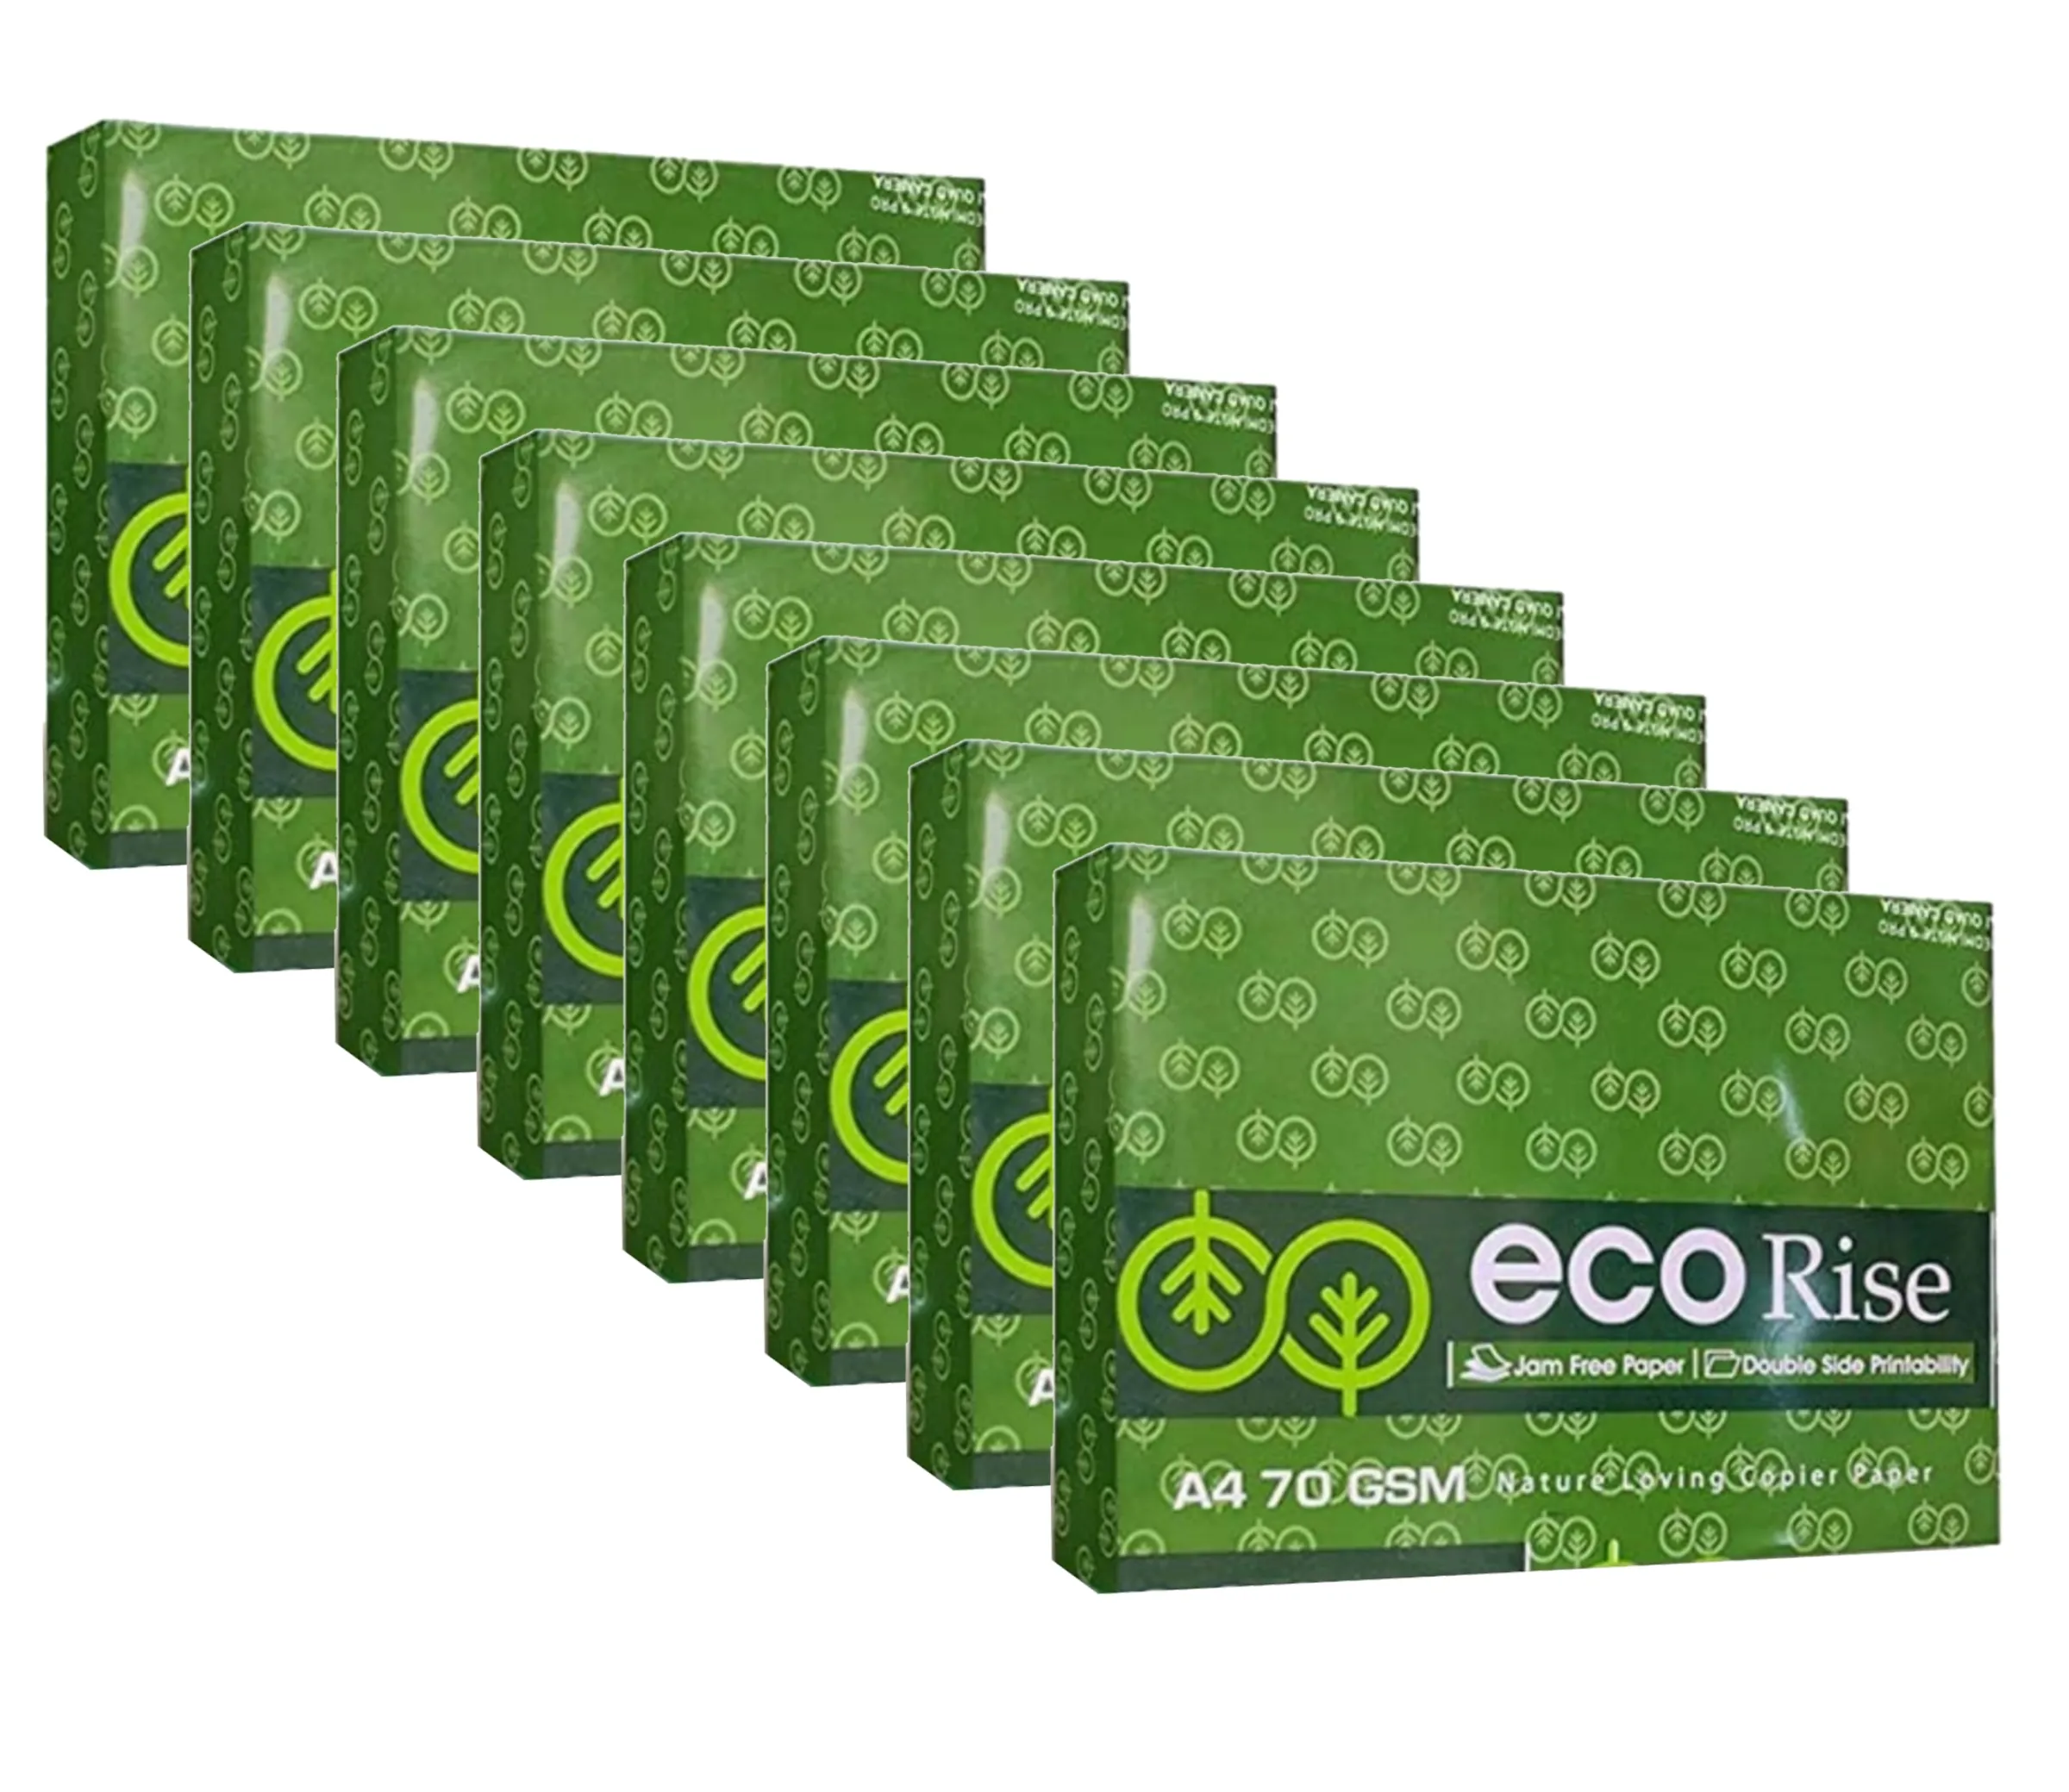 Eco Rise Printing Copy A4 Size JK Paper Eco Tree Friendly 70 GSM 500 Sheet Pack of 8